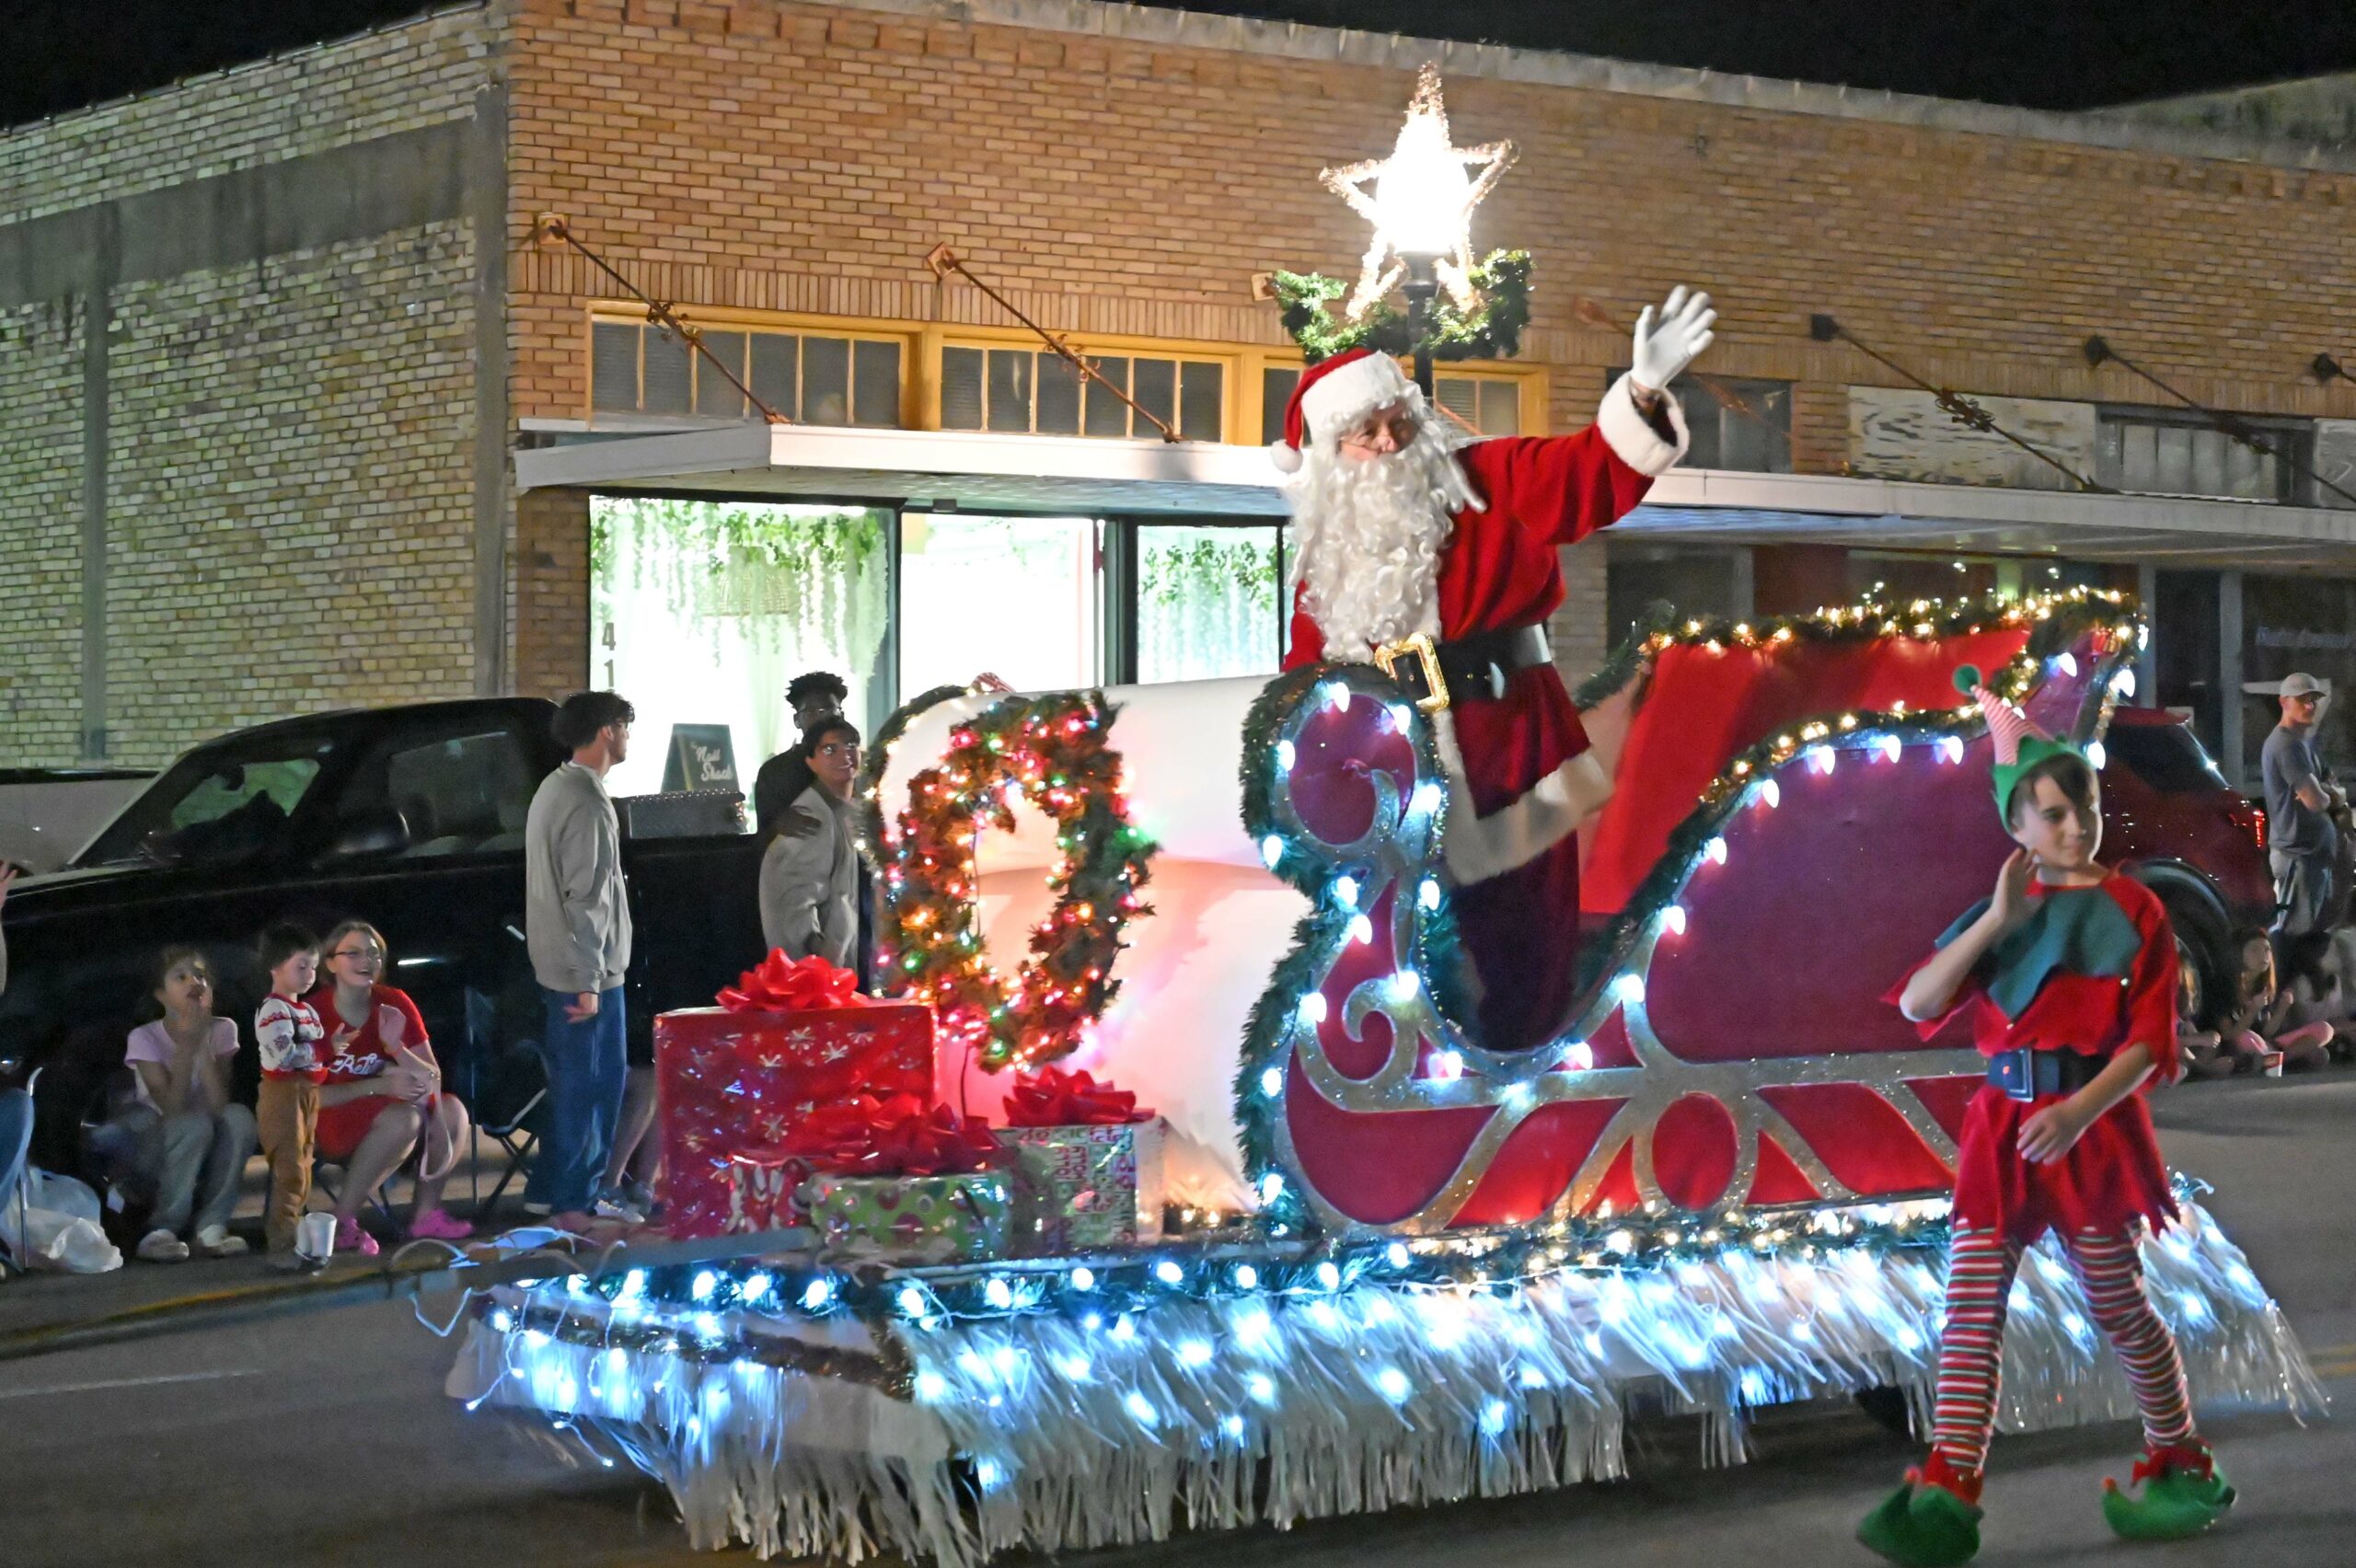 Santa waves at the audience in his sleigh during the 2021 annual Parade of Lights.